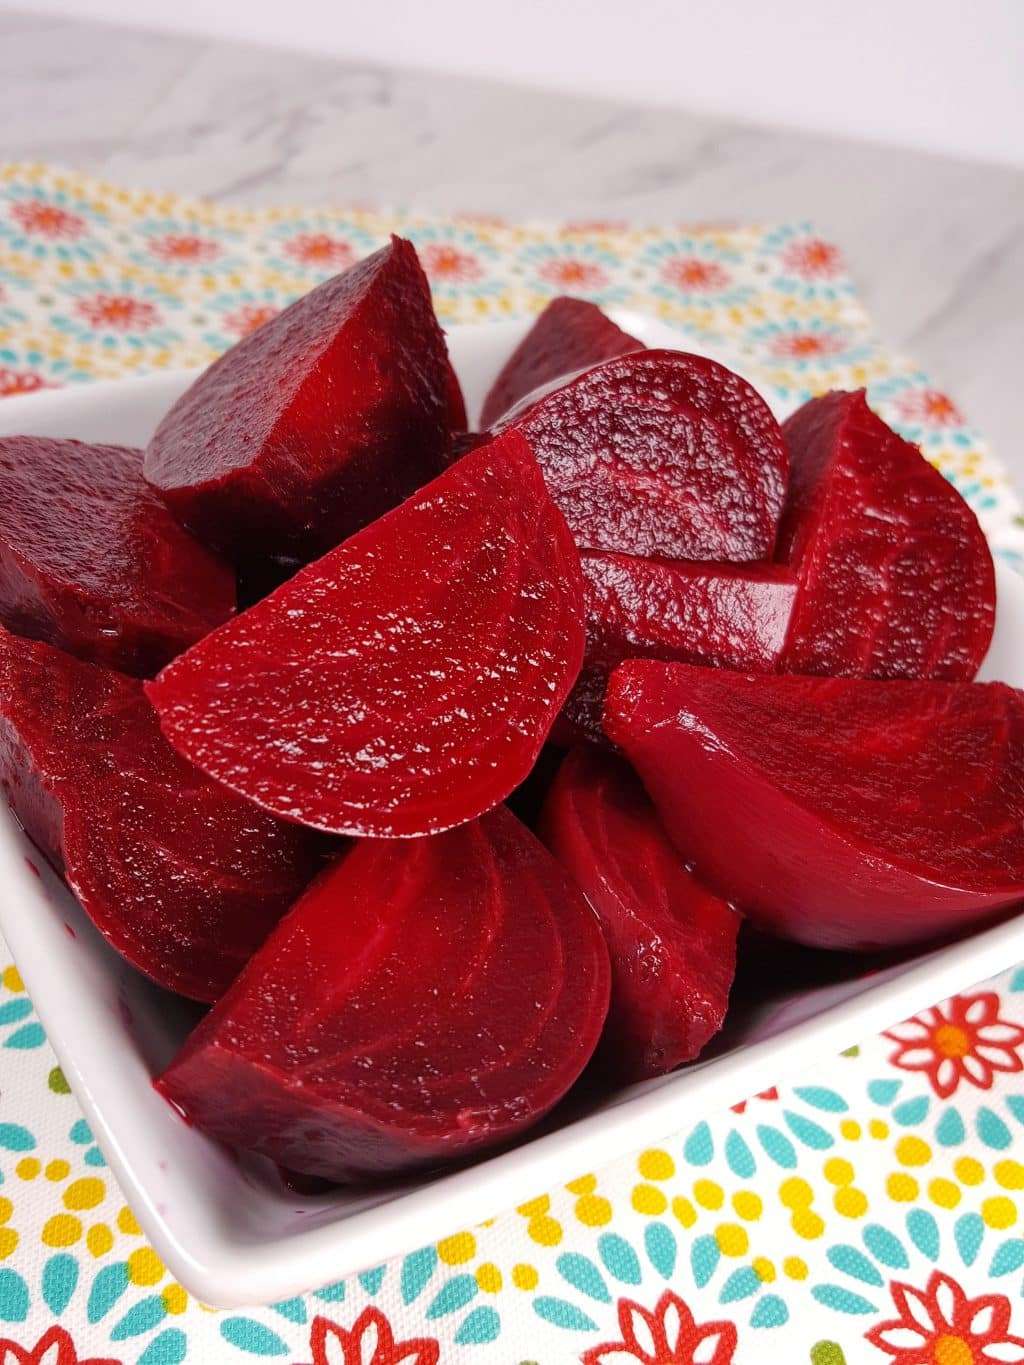 Instant Pot Beets [Fresh Whole Beets]